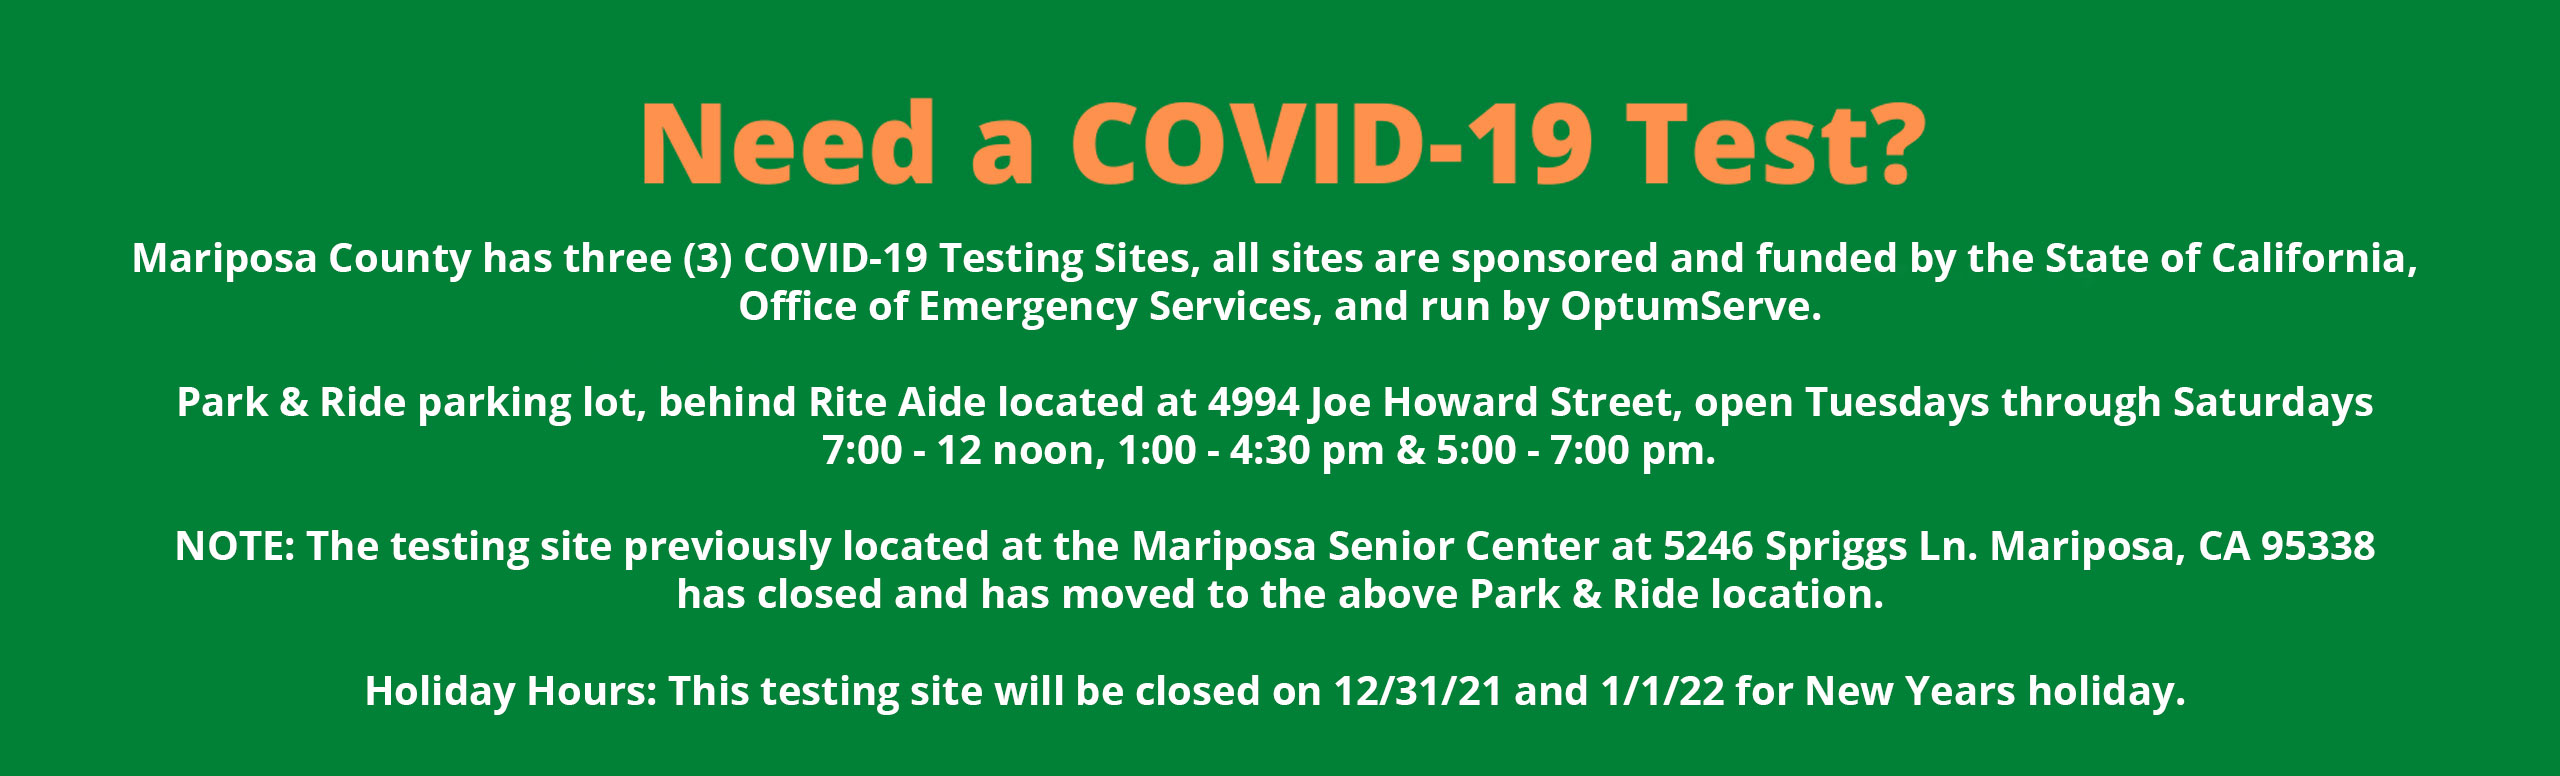 Banner that says:
Need a COVID-19 Test?

Mariposa County has three (3) COVID-19 Testing Sites, all sites are sponsored and funded by the State of California, Office of Emergency Services, and run by OptumServe.

Park & Ride parking lot, behind Rite Aide located at 4994 Joe Howard Street, open Tuesdays through Saturdays 7:00 - 12 noon, 1:00 - 4:30 pm & 5:00 - 7:00 pm.  
NOTE: The testing site previously located at the Mariposa Senior Center at 5246 Spriggs Ln. Mariposa, CA 95338 has closed and has moved to the above Park & Ride location.
Holiday Hours: This testing site will be closed on 12/31/21 and 1/1/22 for New Years holiday.